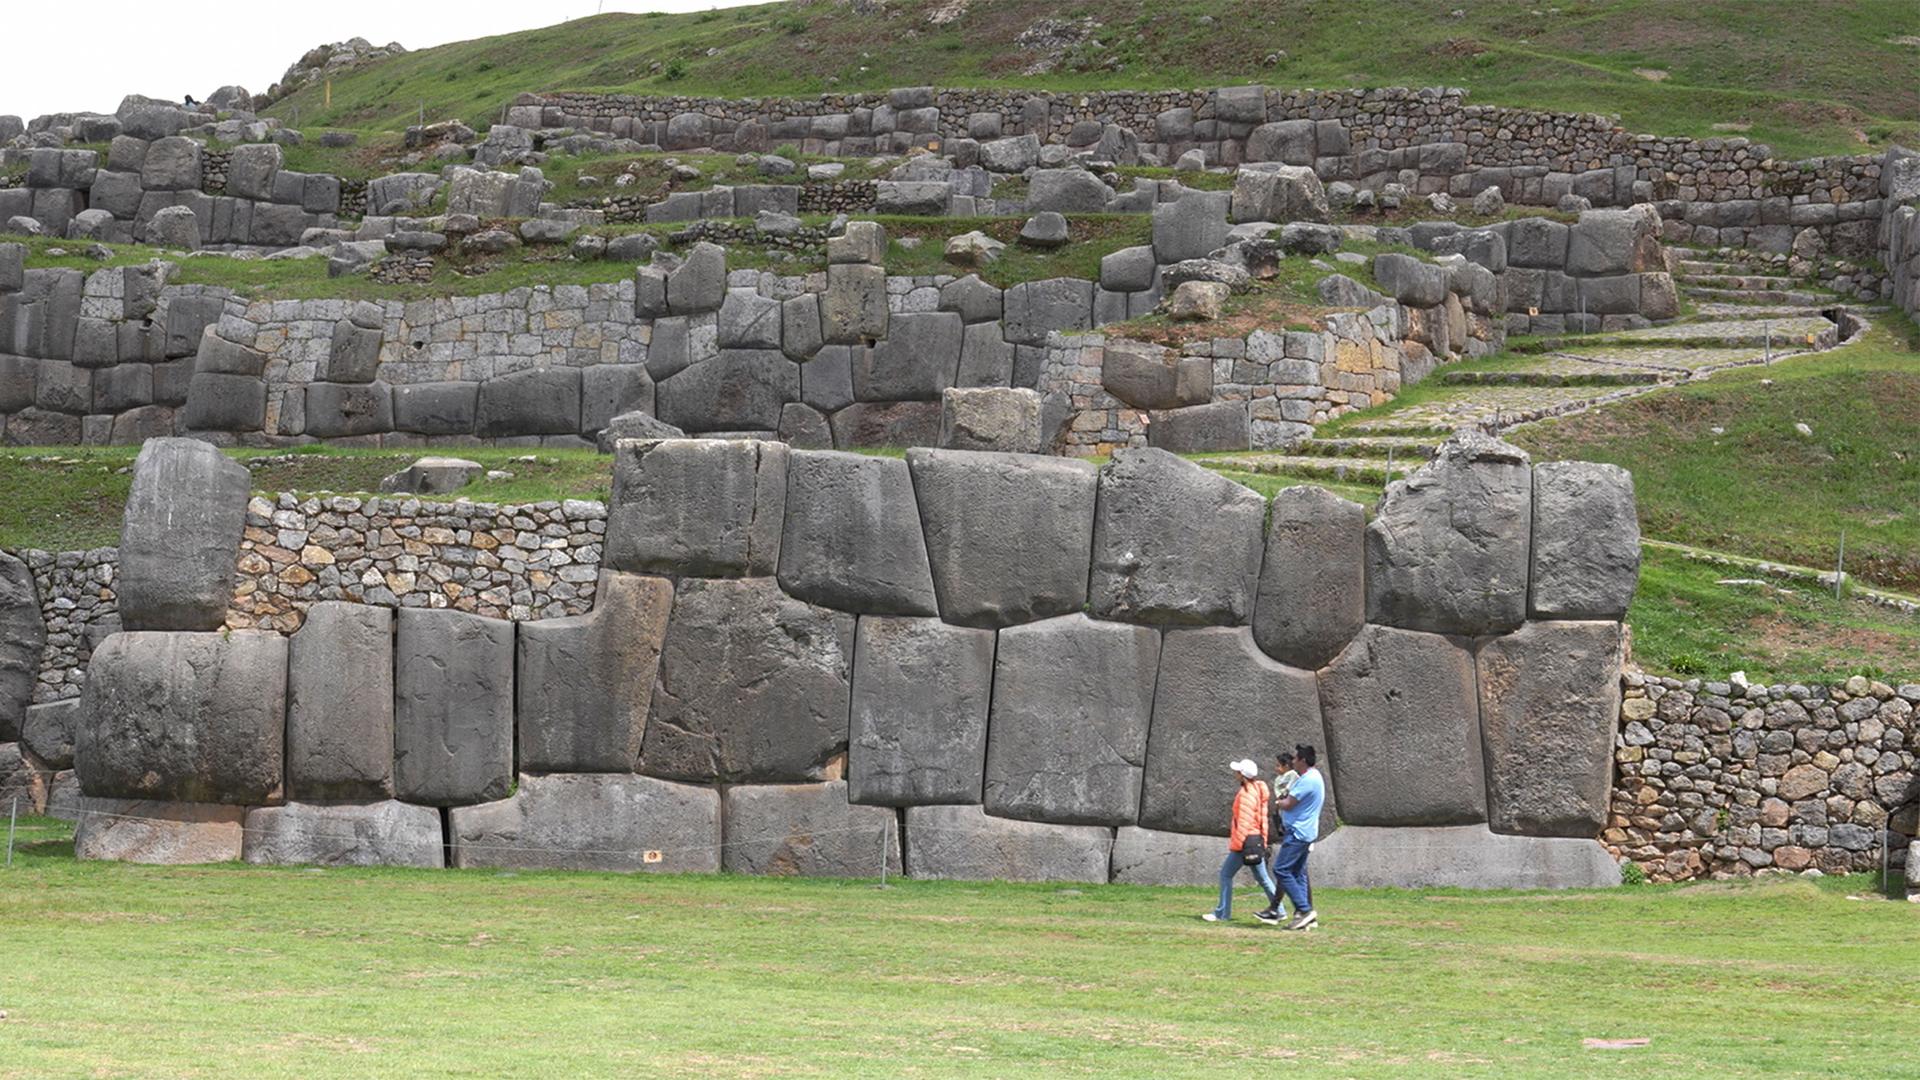 The Inca temple of Sacsayhuamán gets only a handful of visitors per day now, as tourists cancel their trips to Cusco amid protests taking place in Peru.